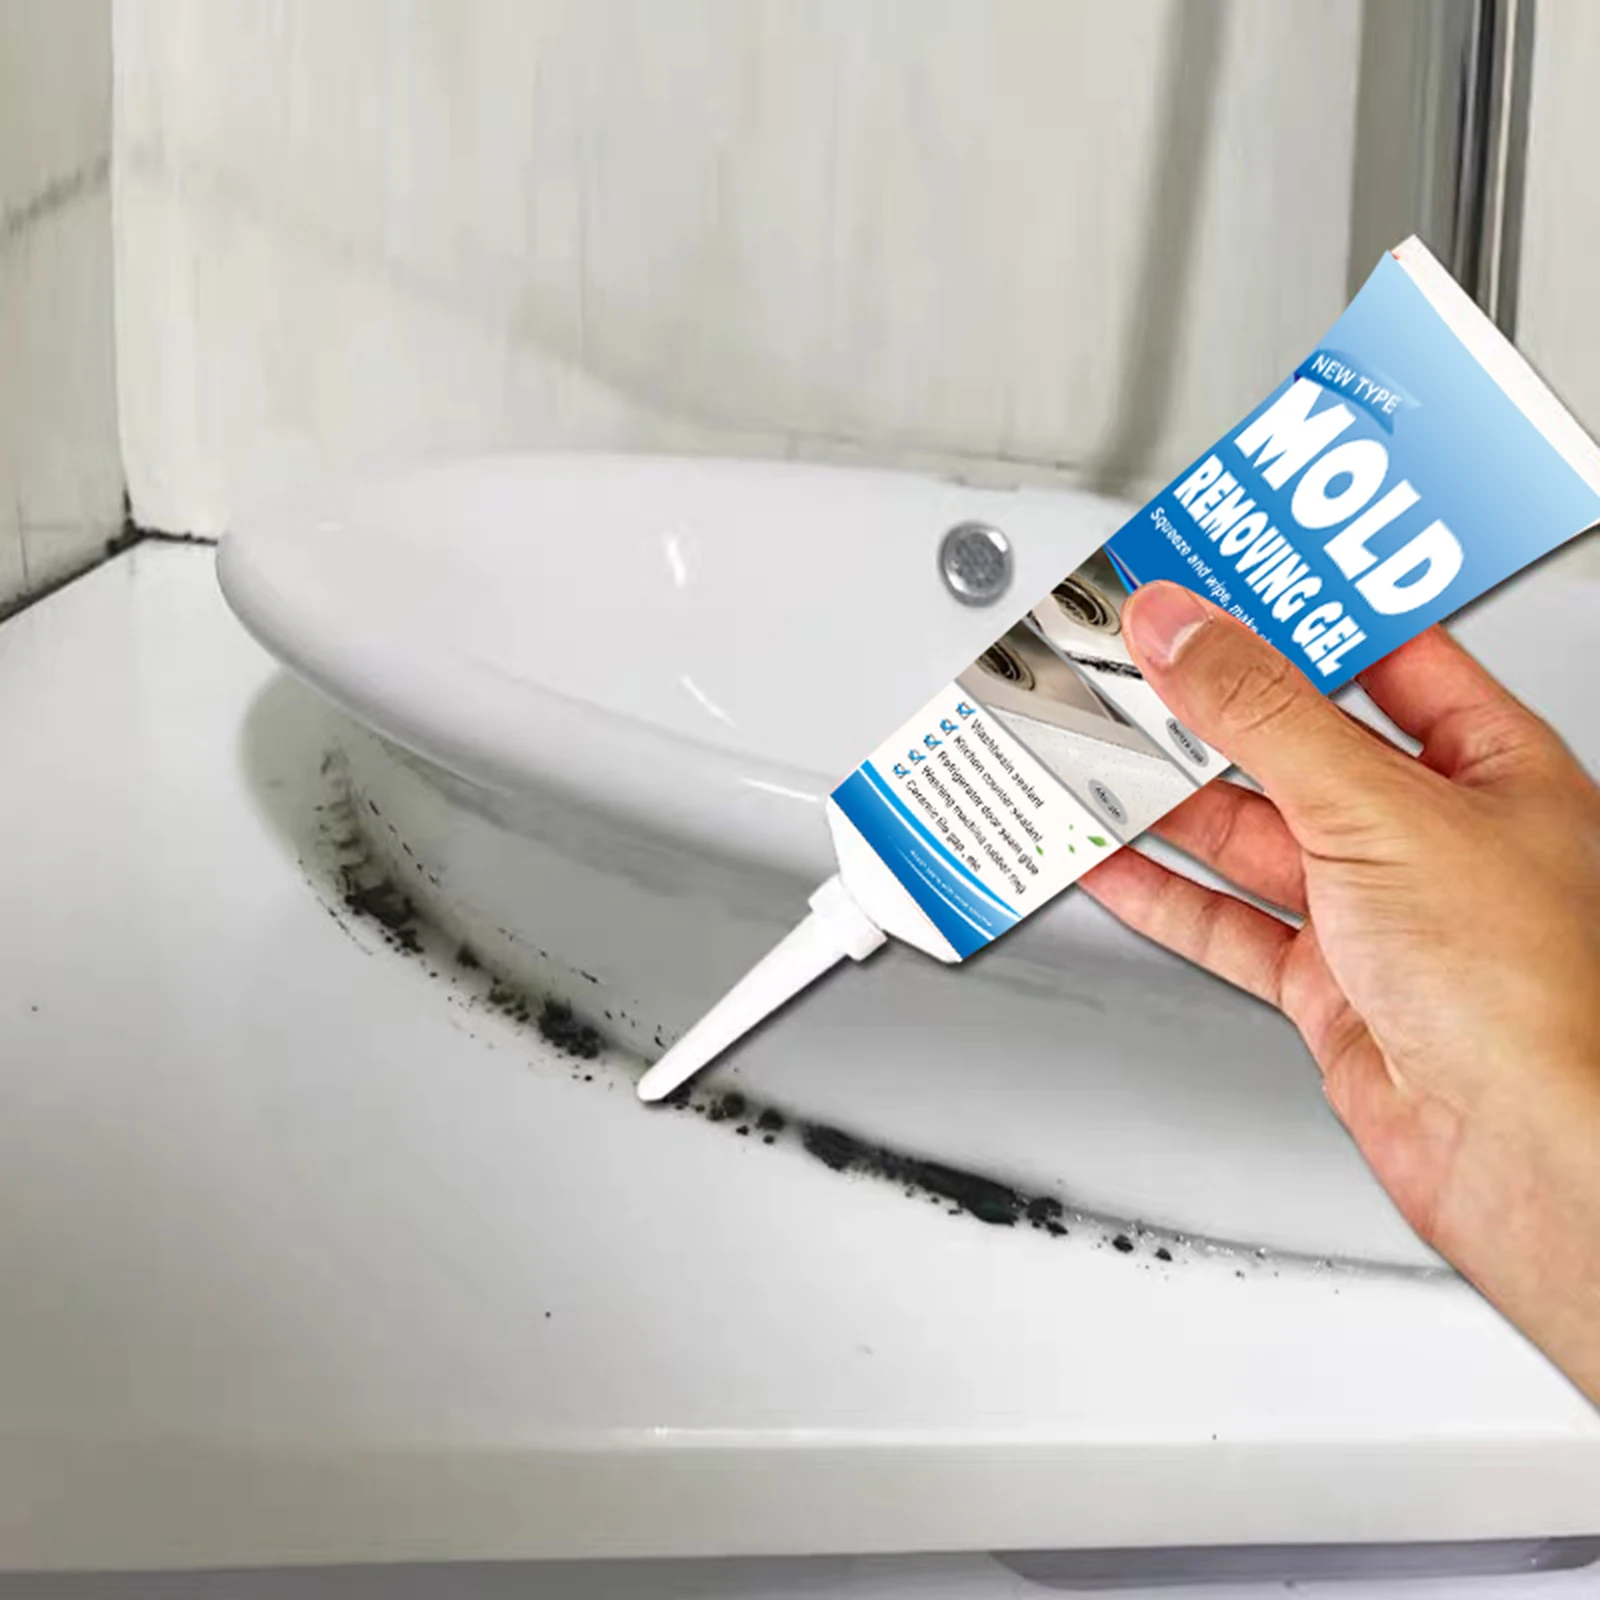 80/90g Mould Removing Cream Anti Mildews Ceramic Tile Remover Cleaning Tools Home Supplies VC | Дом и сад